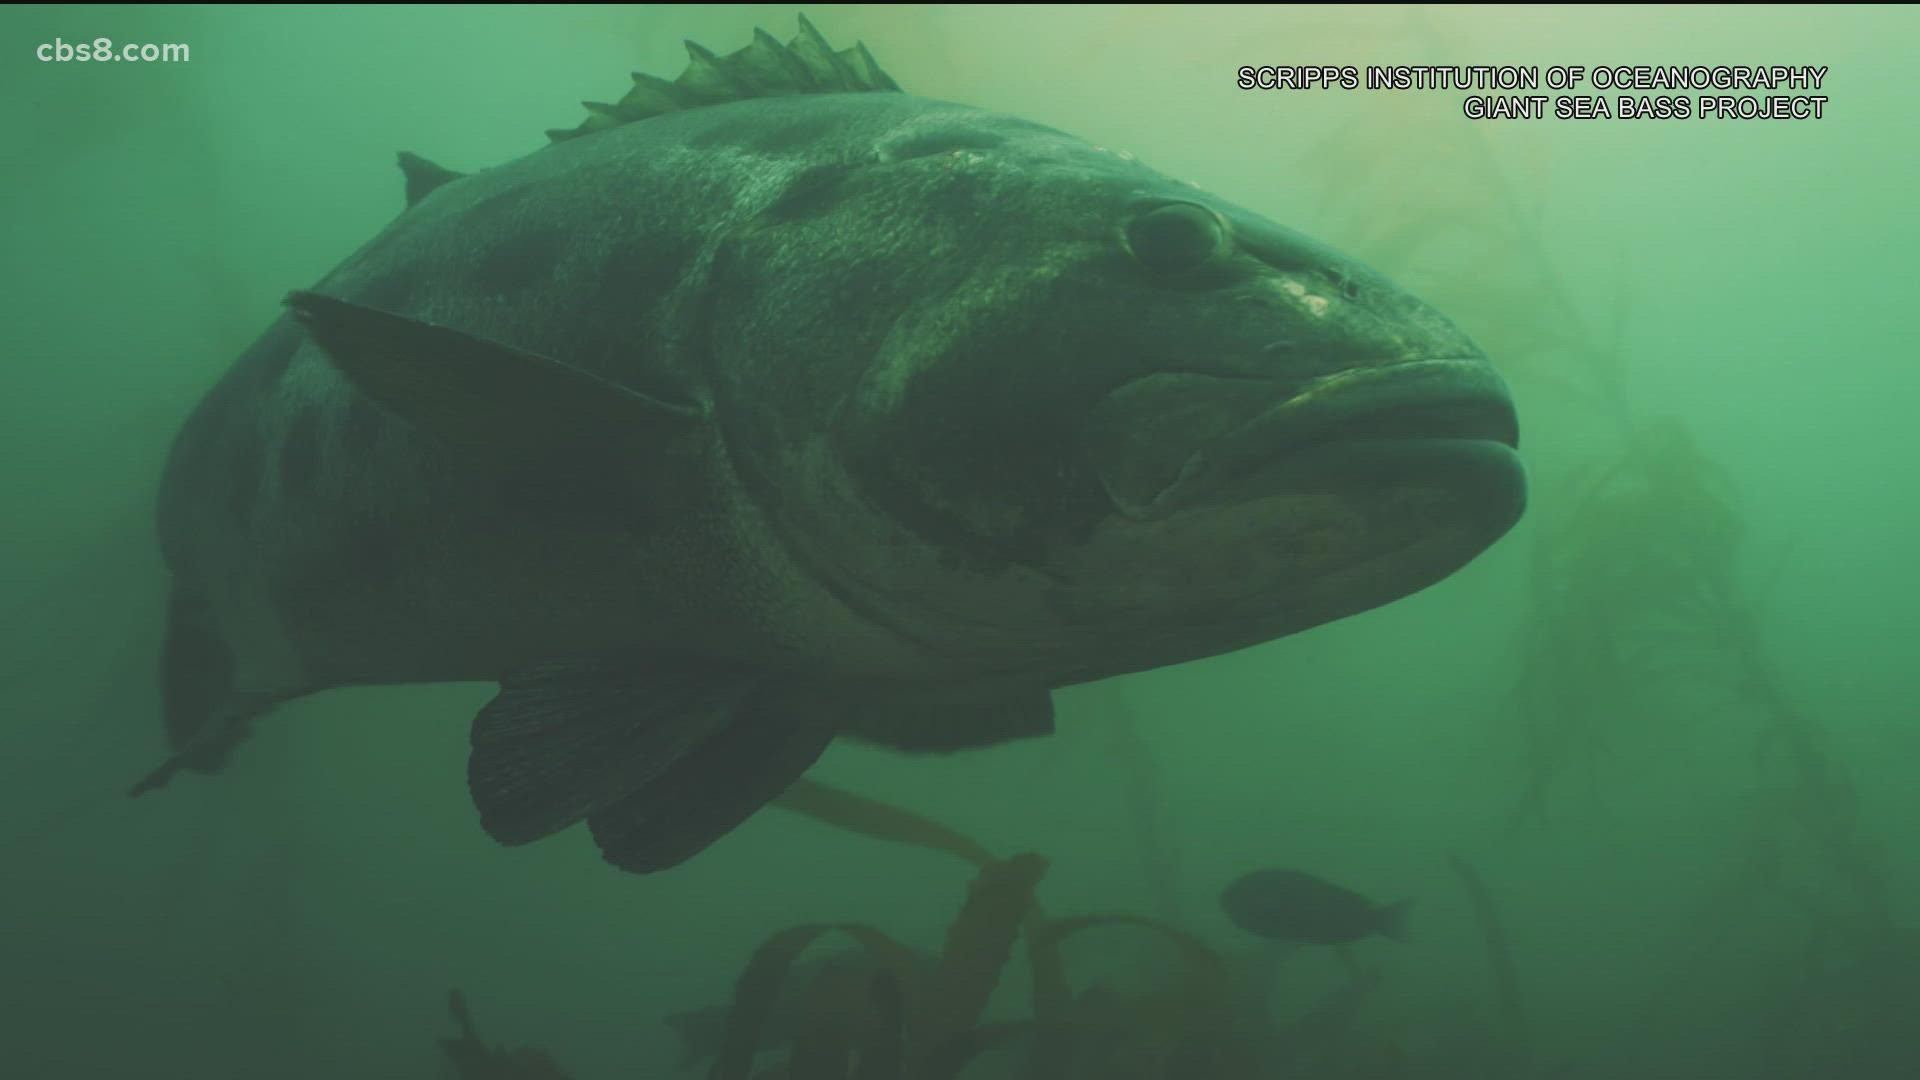 Arturo Ramirez with Scripps Institution of Oceanography has dedicated his research to the giant sea bass and found there are more in Mexico than initially thought.